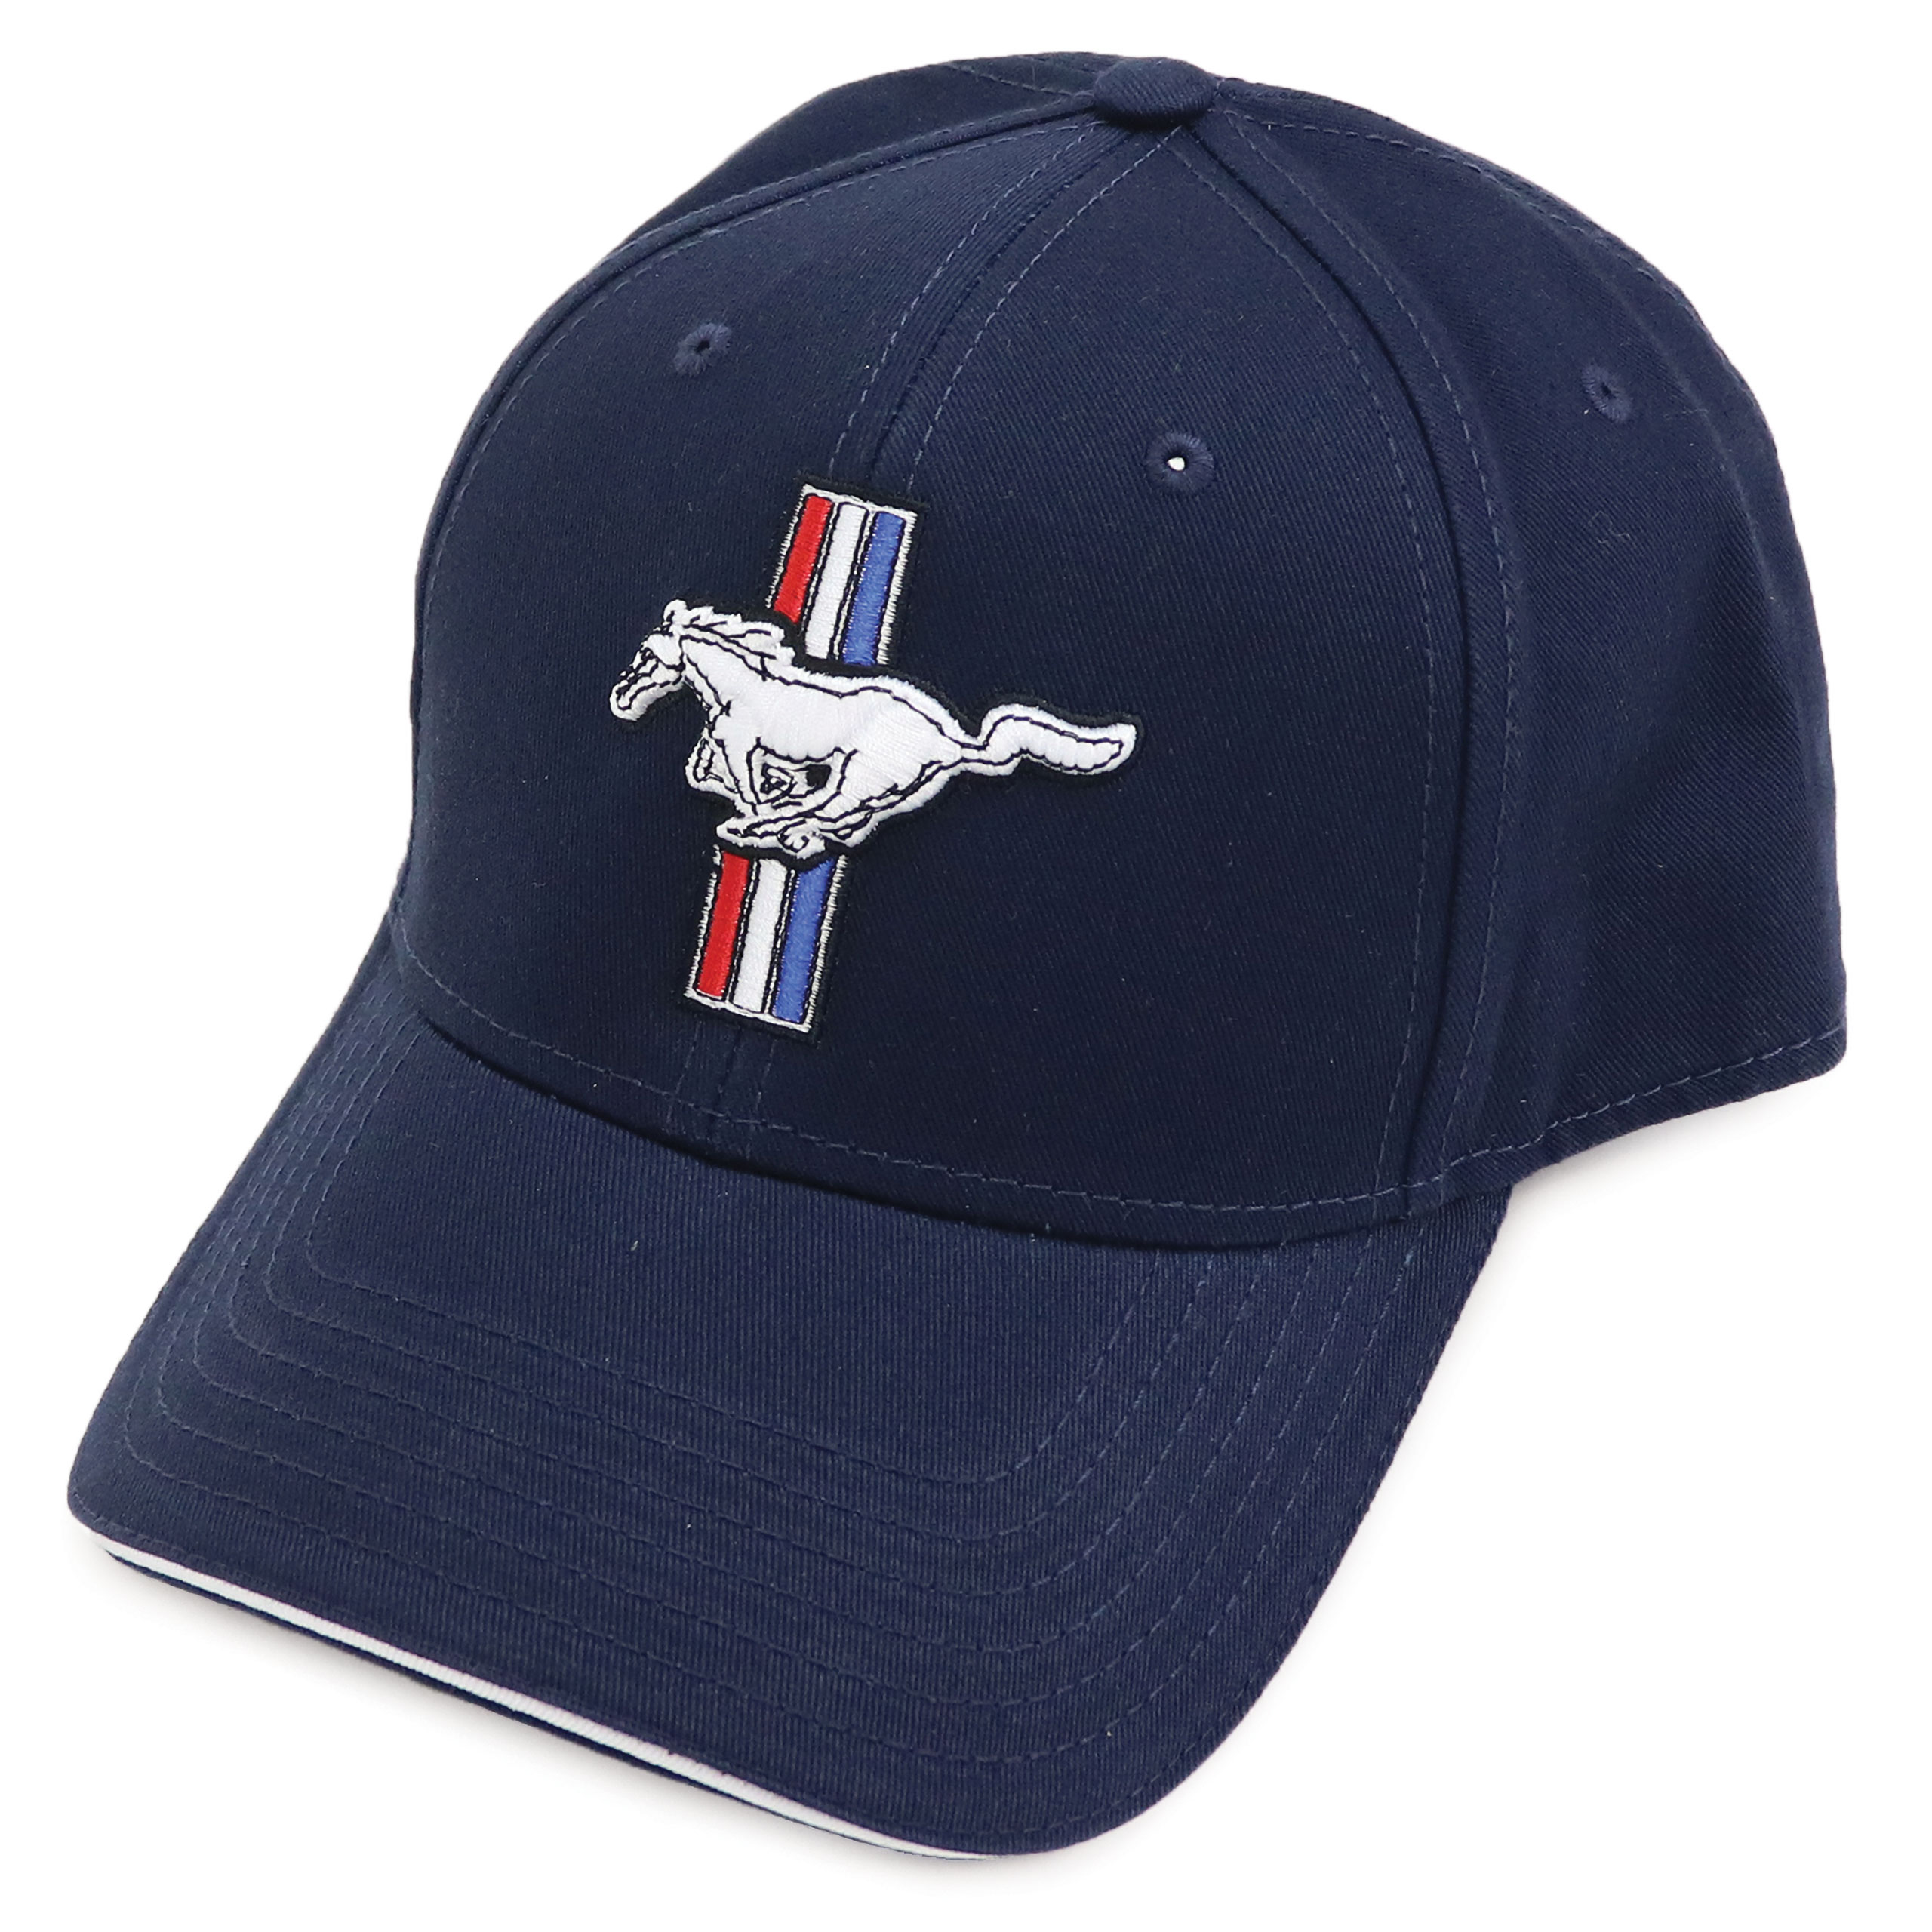 - Mustang America - Mustang Cap 1964-2021 Blue Cotton of Logo Auto Accessories Ford W/Pony Twill